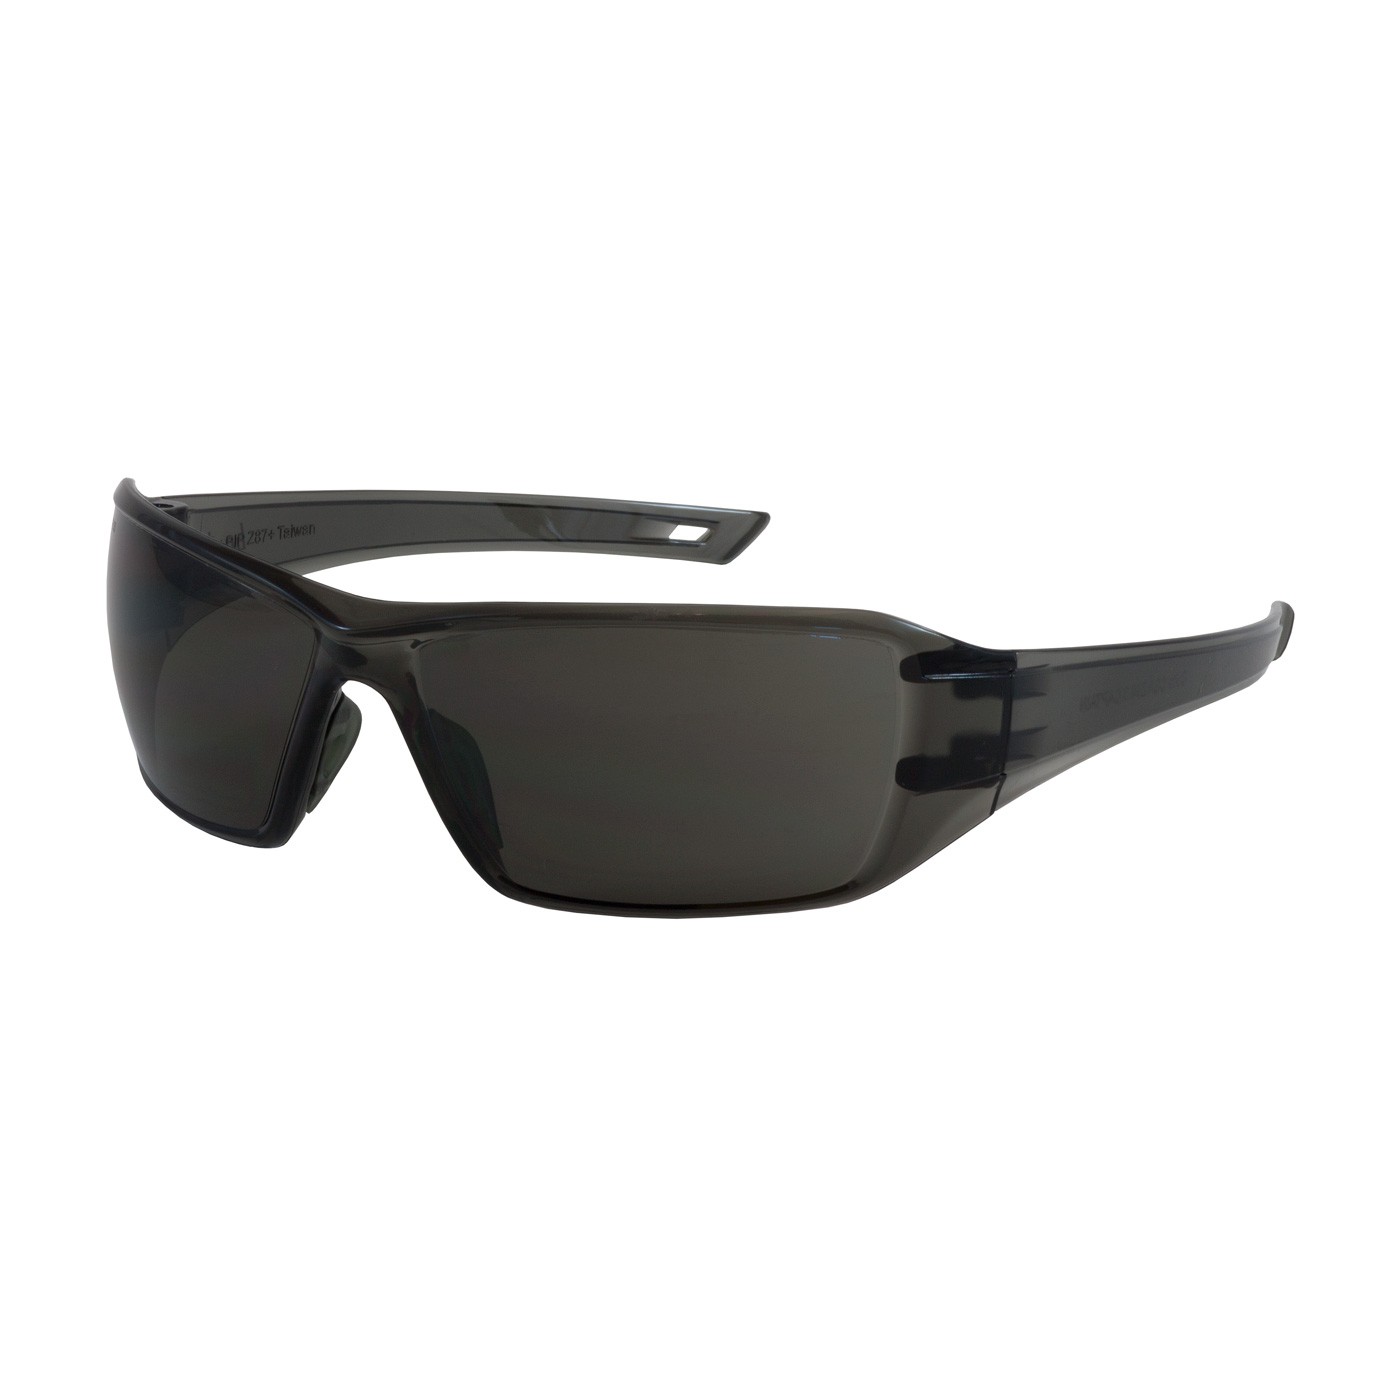 Captain™ Rimless Safety Glasses with Gray Temple, Gray Lens and Anti-Scratch / Anti-Fog Coating  (#250-46-0021)